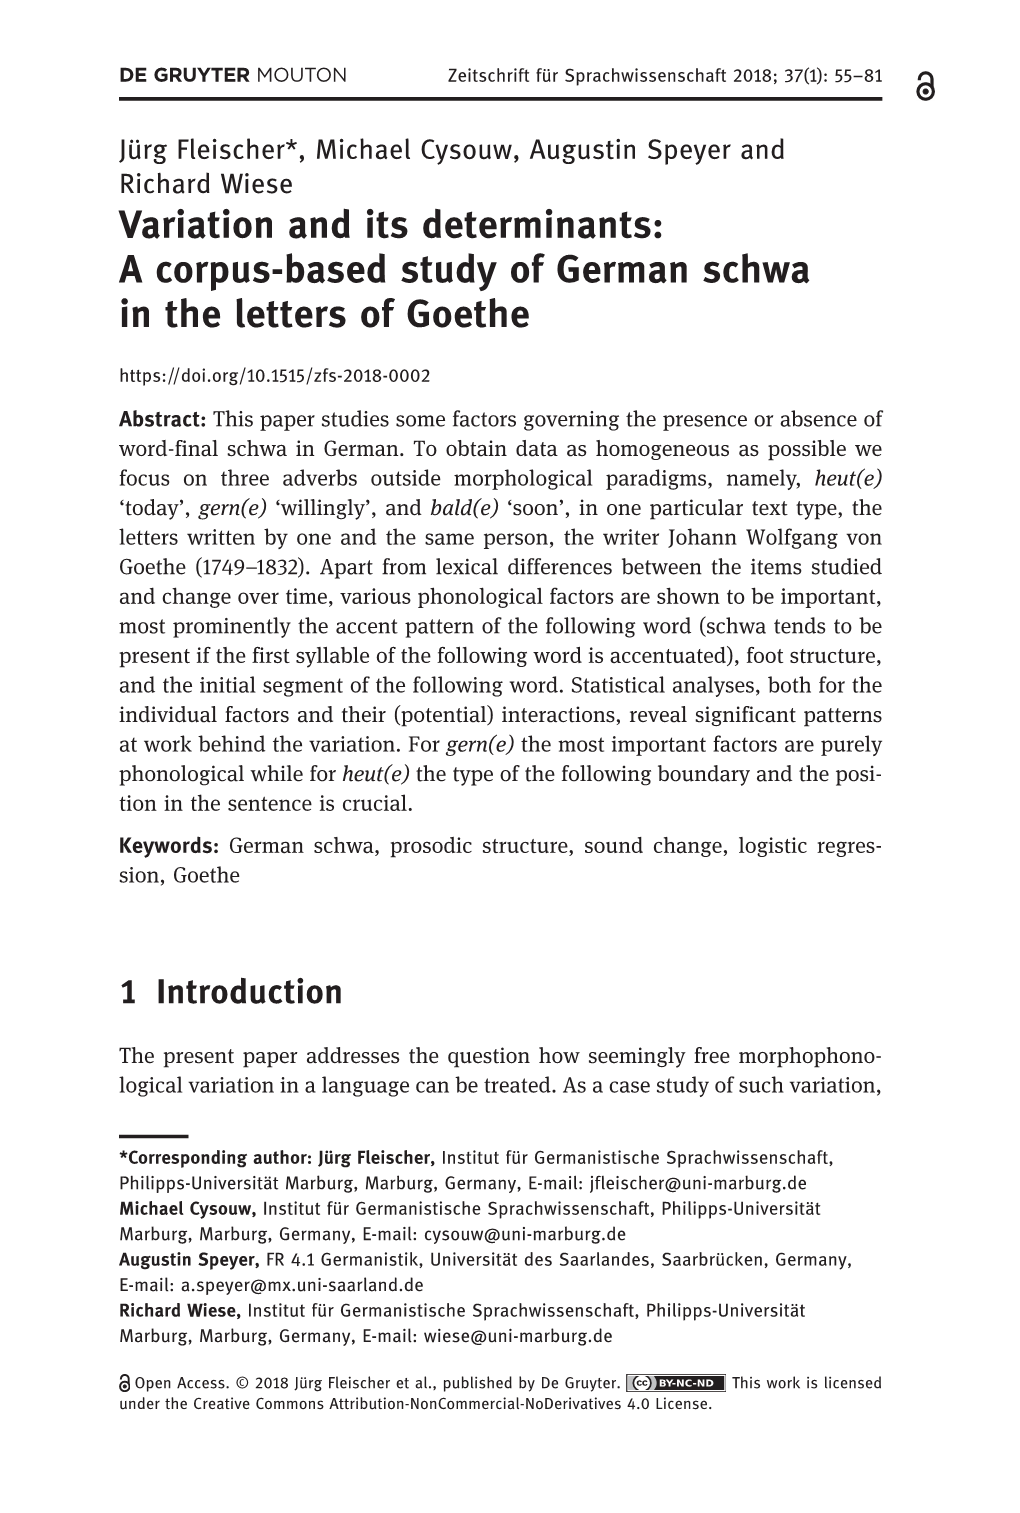 A Corpus-Based Study of German Schwa in the Letters of Goethe